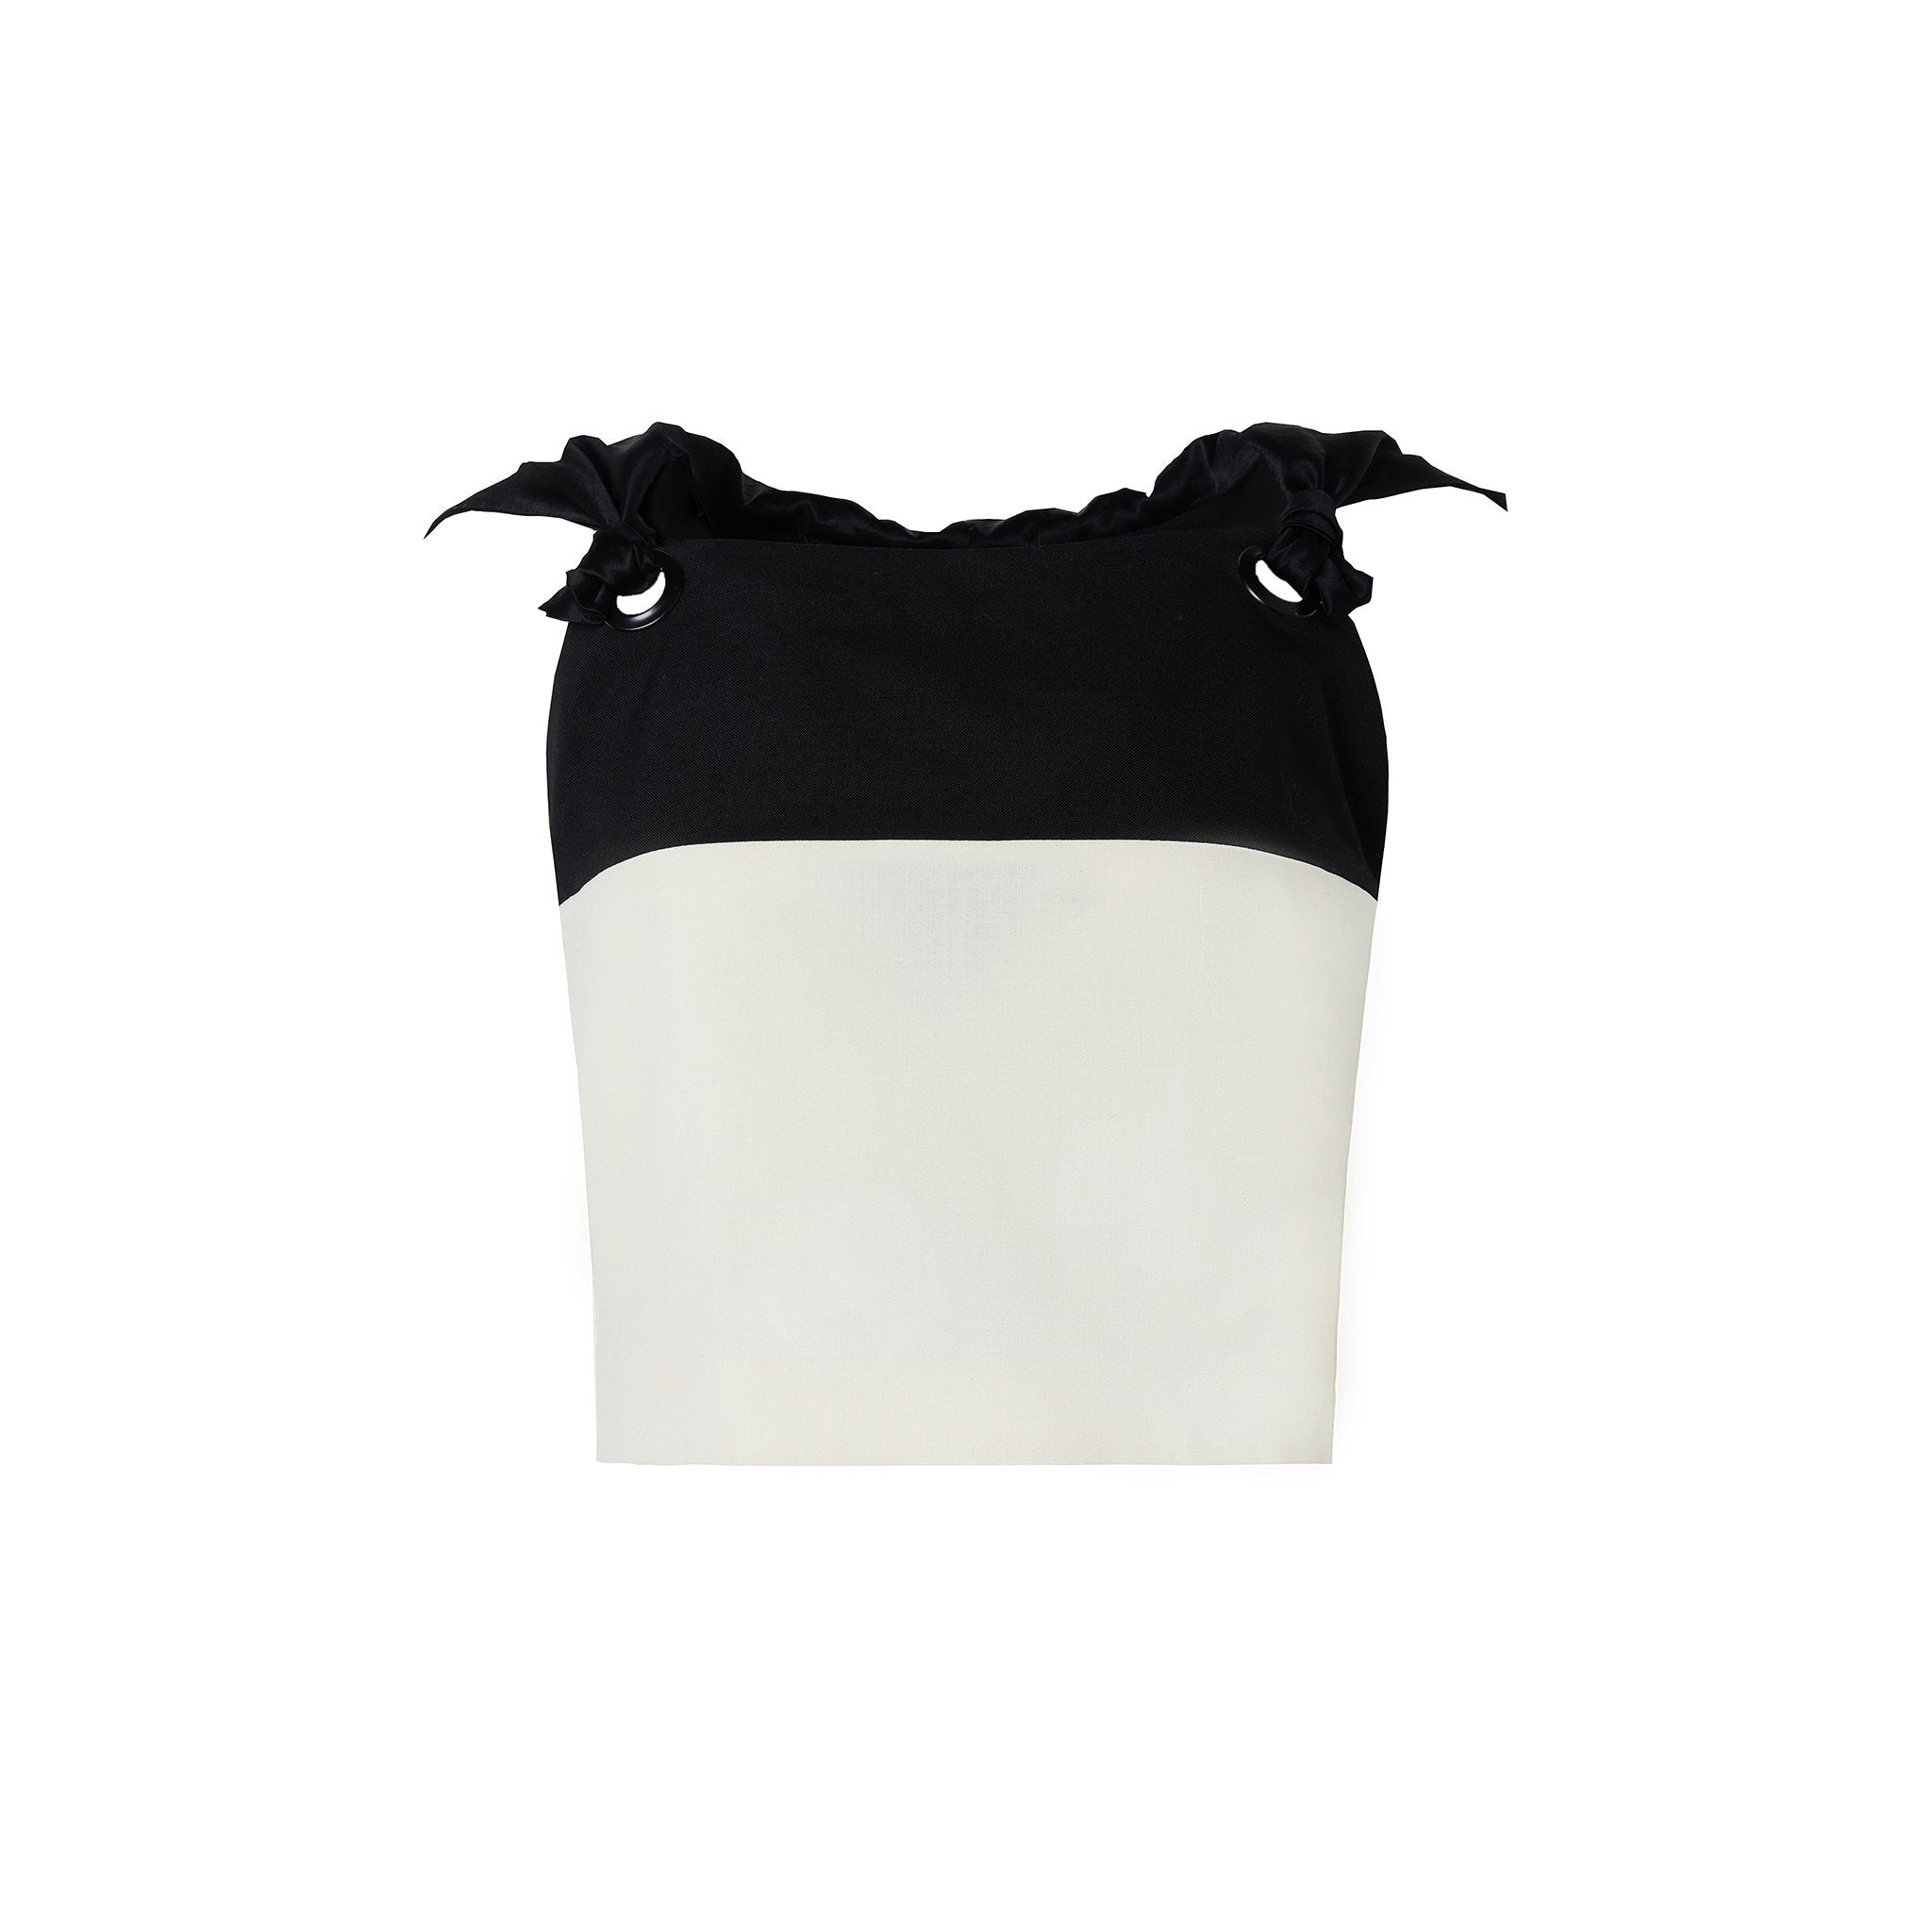 Andrea Martin Black and White Color Contrast Hooded Shirt | MADA IN CHINA